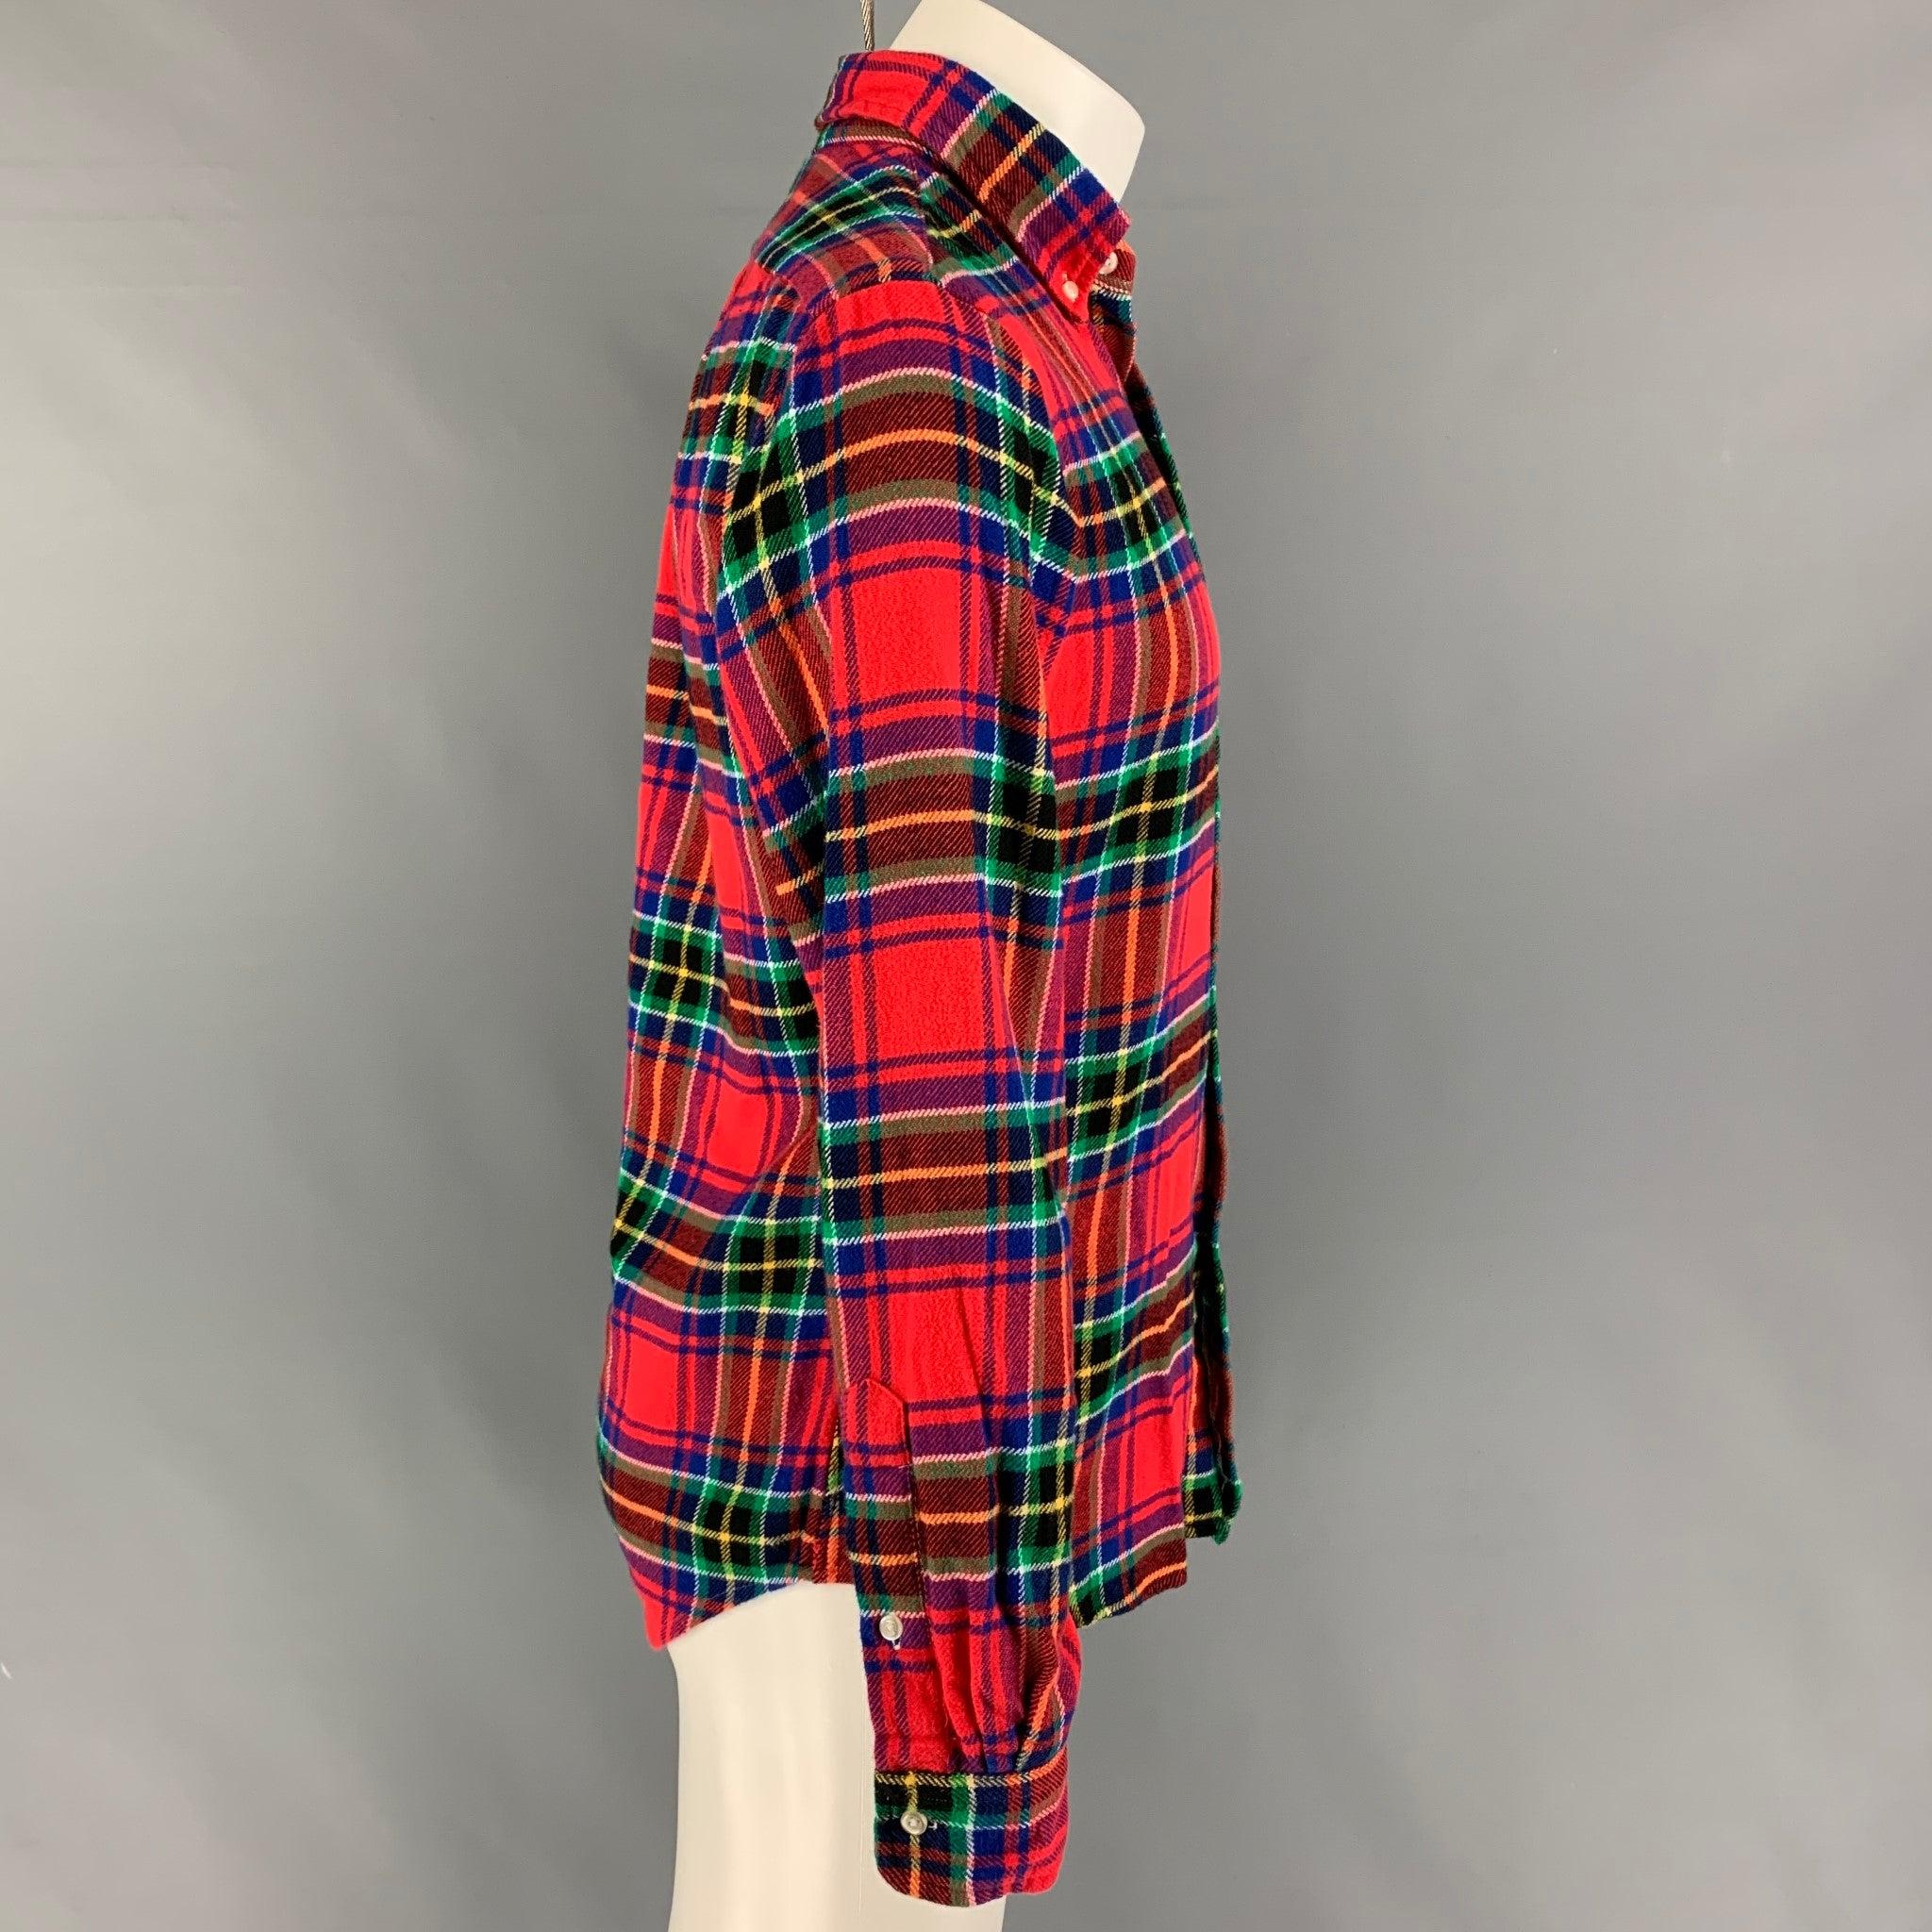 RALPH LAUREN long sleeve shirt comes in a multi-color plaid cotton featuring a custom fit, button down collar, and a button up closure.
Very Good
Pre-Owned Condition. 

Marked:   S 

Measurements: 
 
Shoulder: 17.5 inches  Chest: 38 inches  Sleeve: